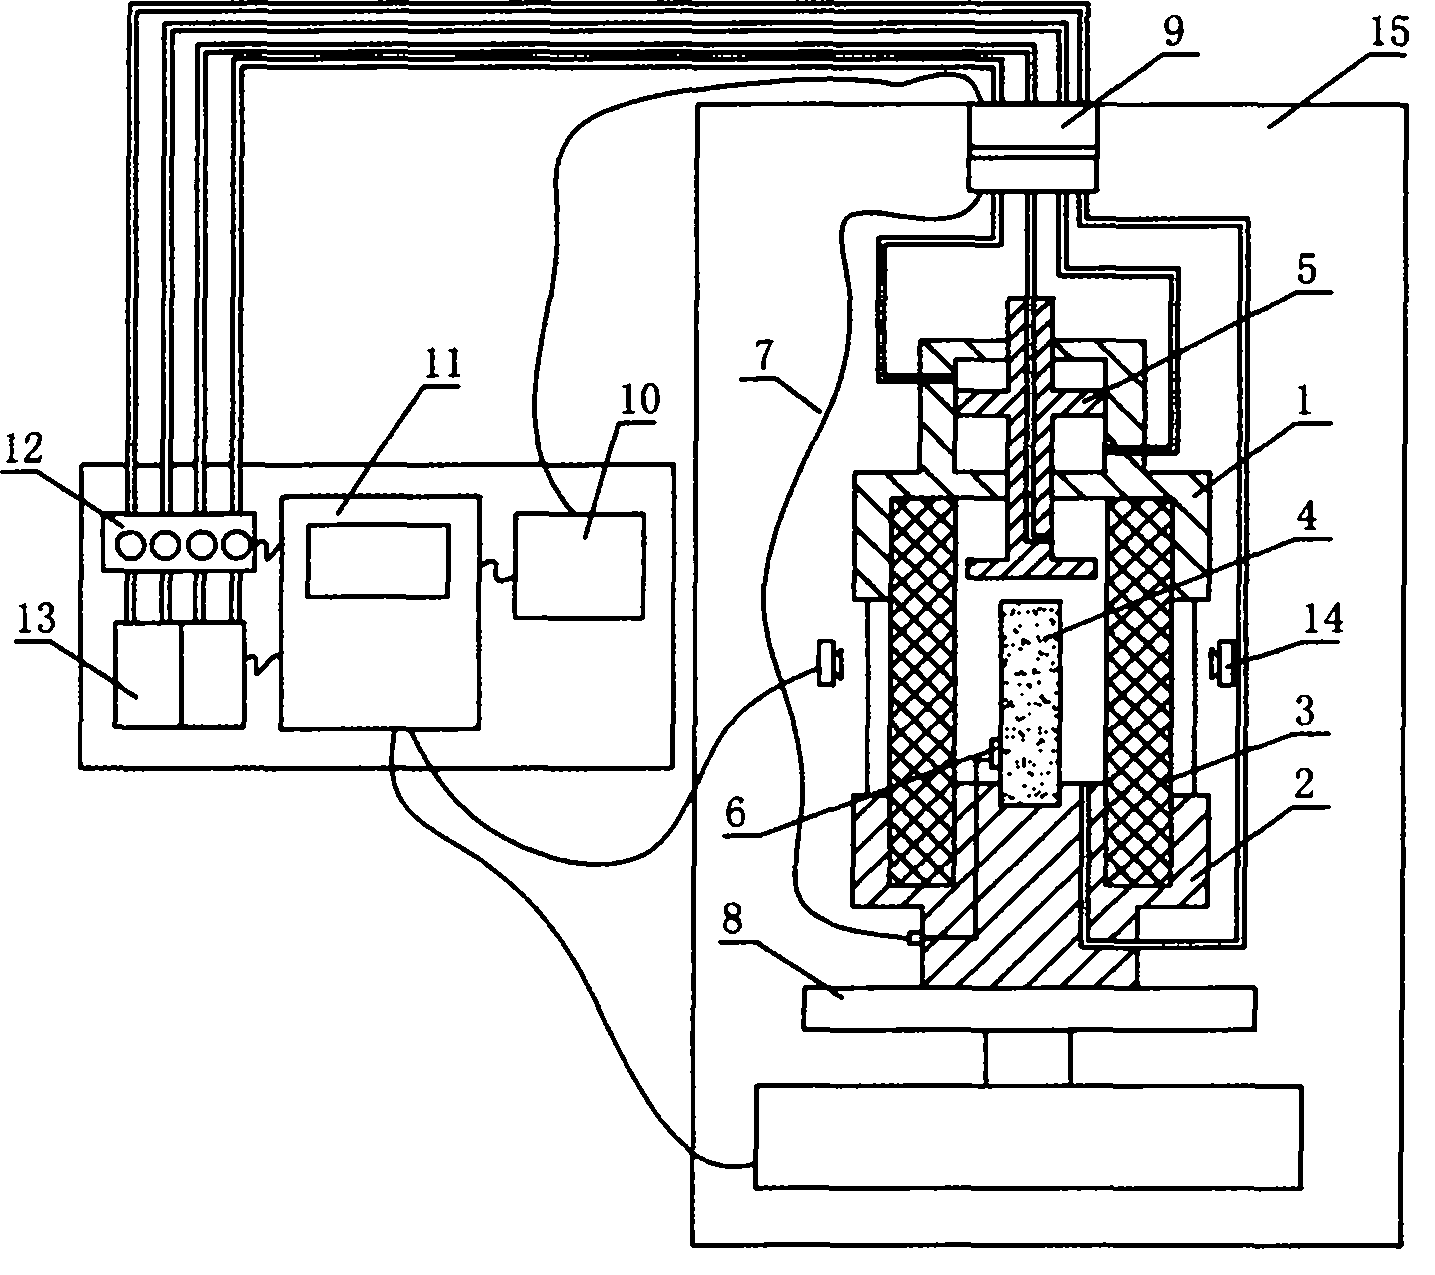 Remote controllable loading method and equipment with fluid CT (Computed Tomography) scanning